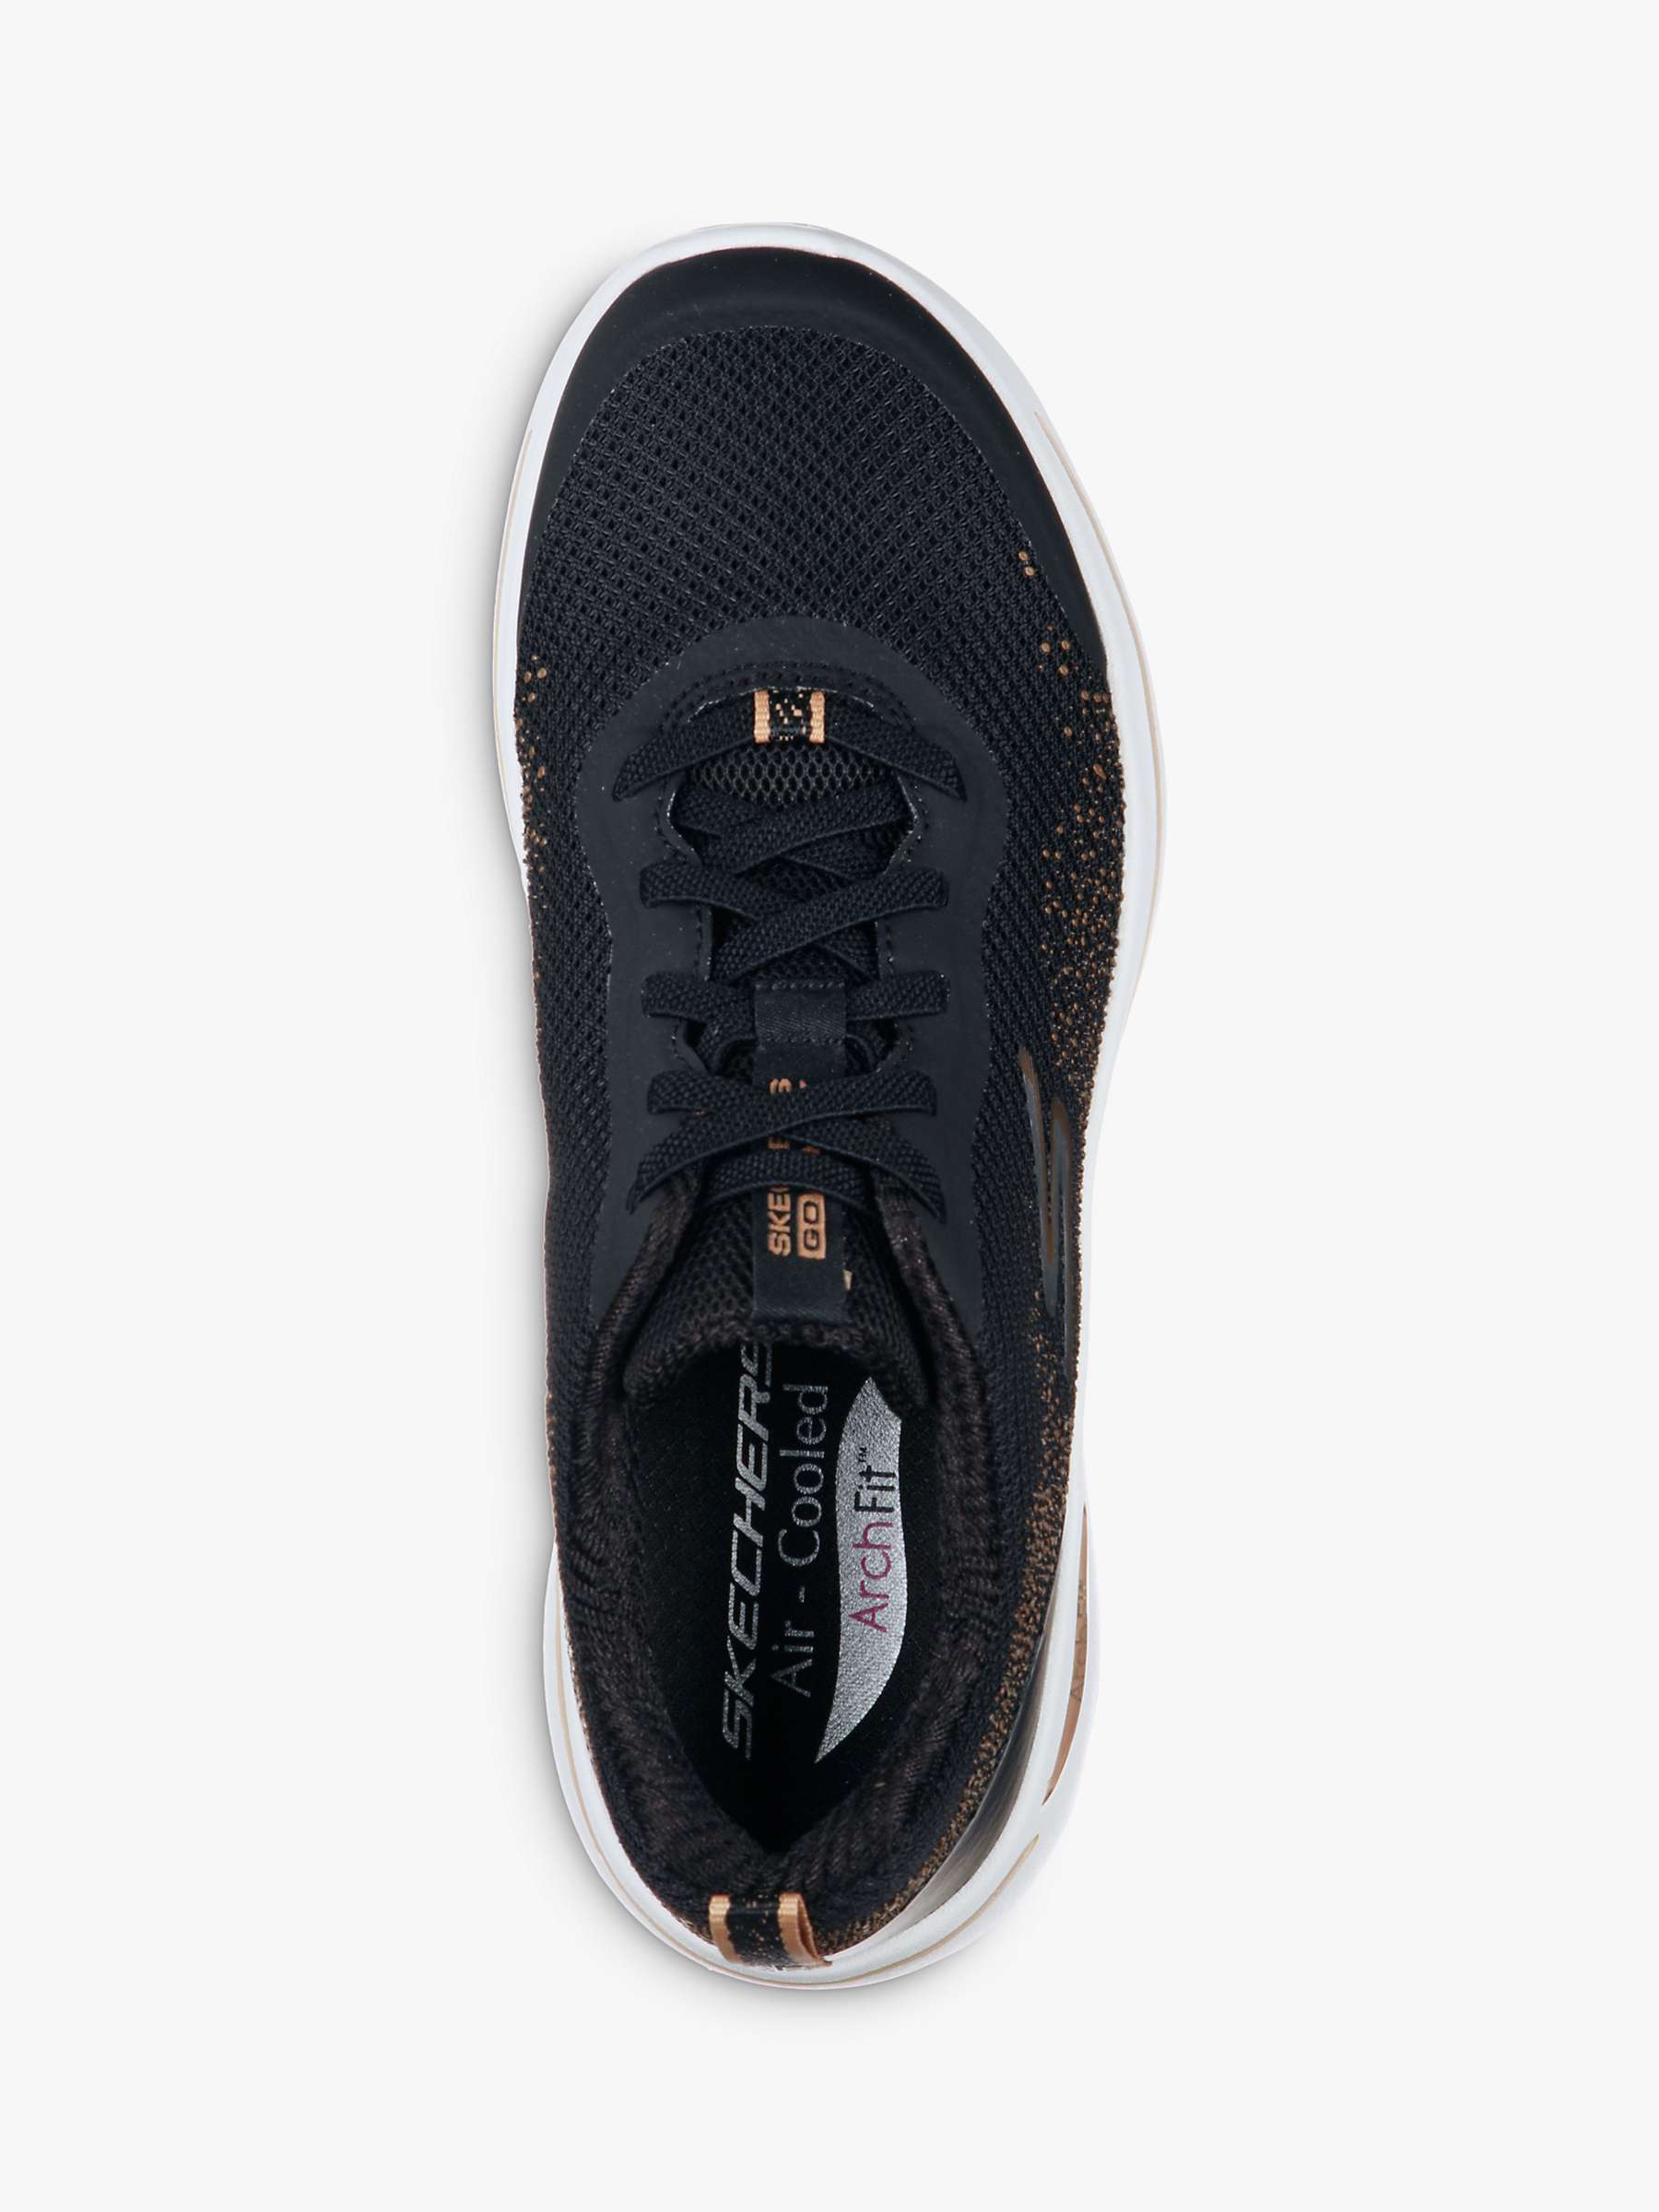 Skechers Go Walk Stars Arch Fit Trainers, Black/Gold at John Lewis ...